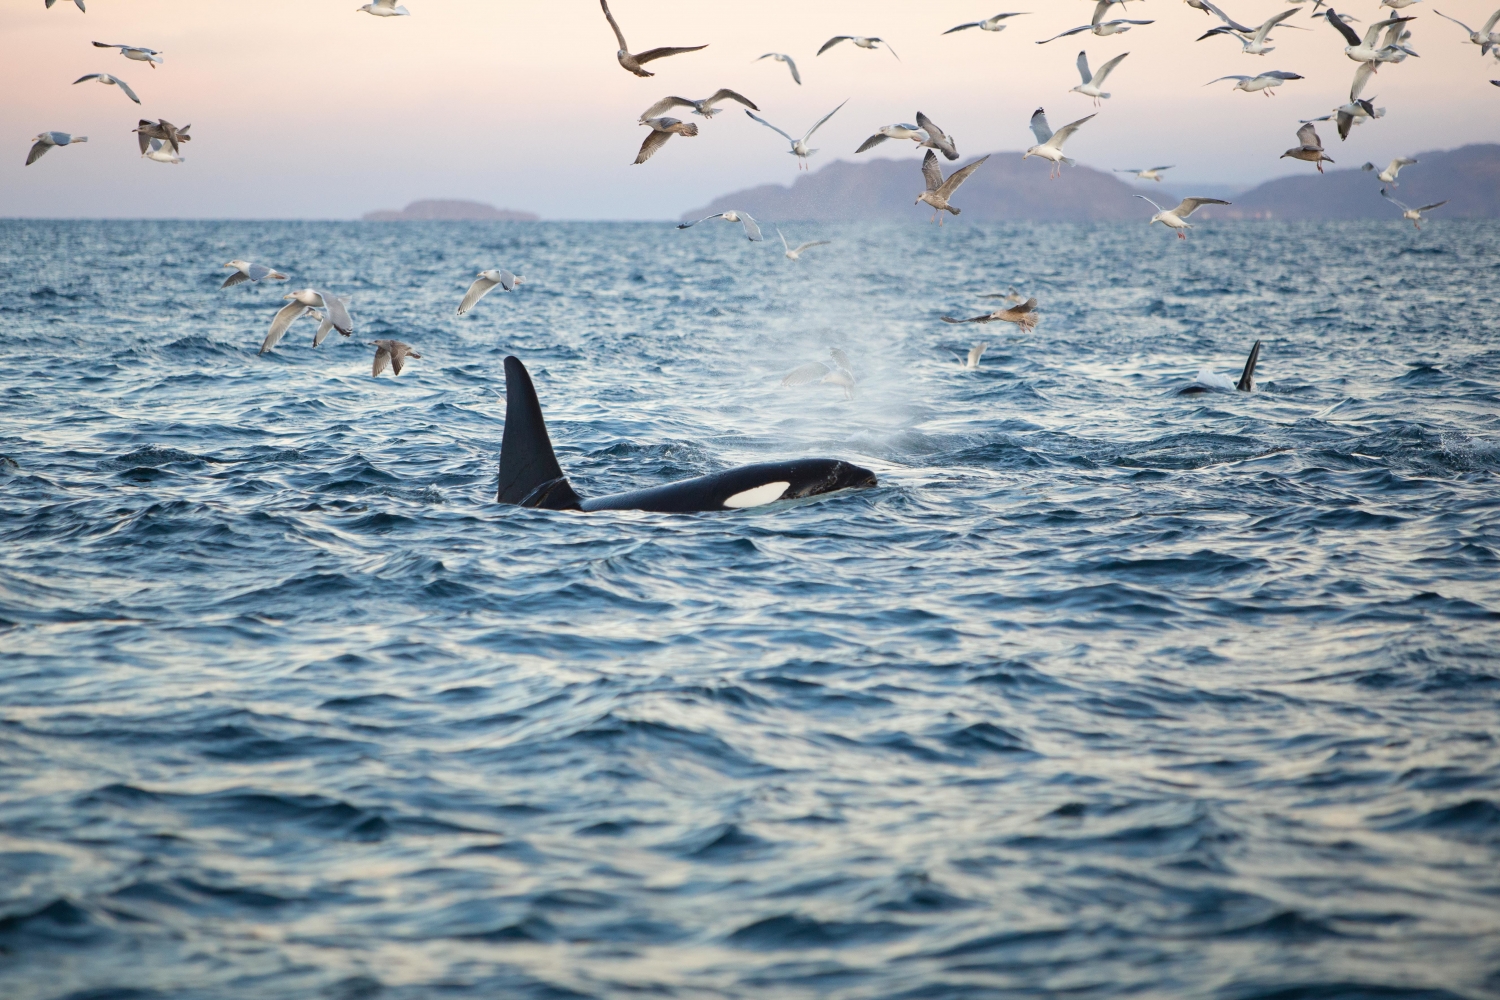 Orca and birds hunting fish